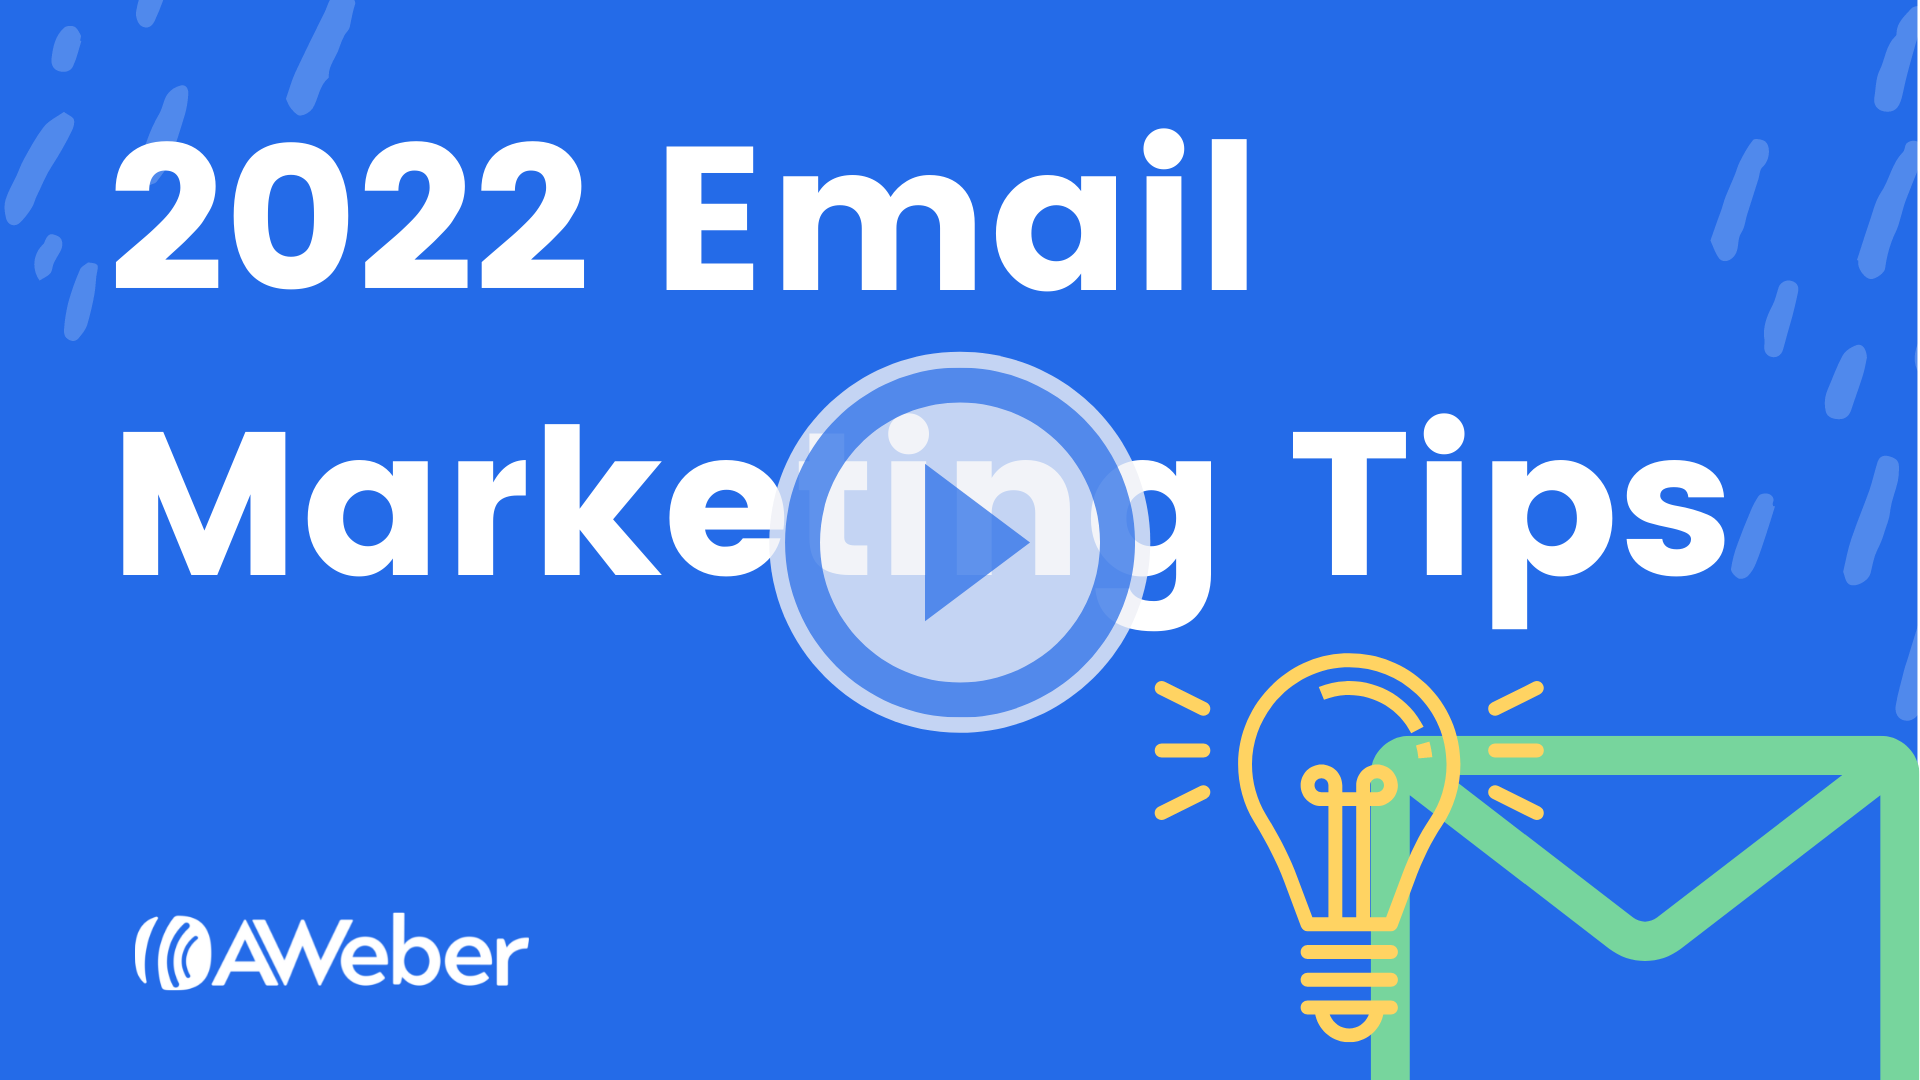 2022 Email Marketing Tips